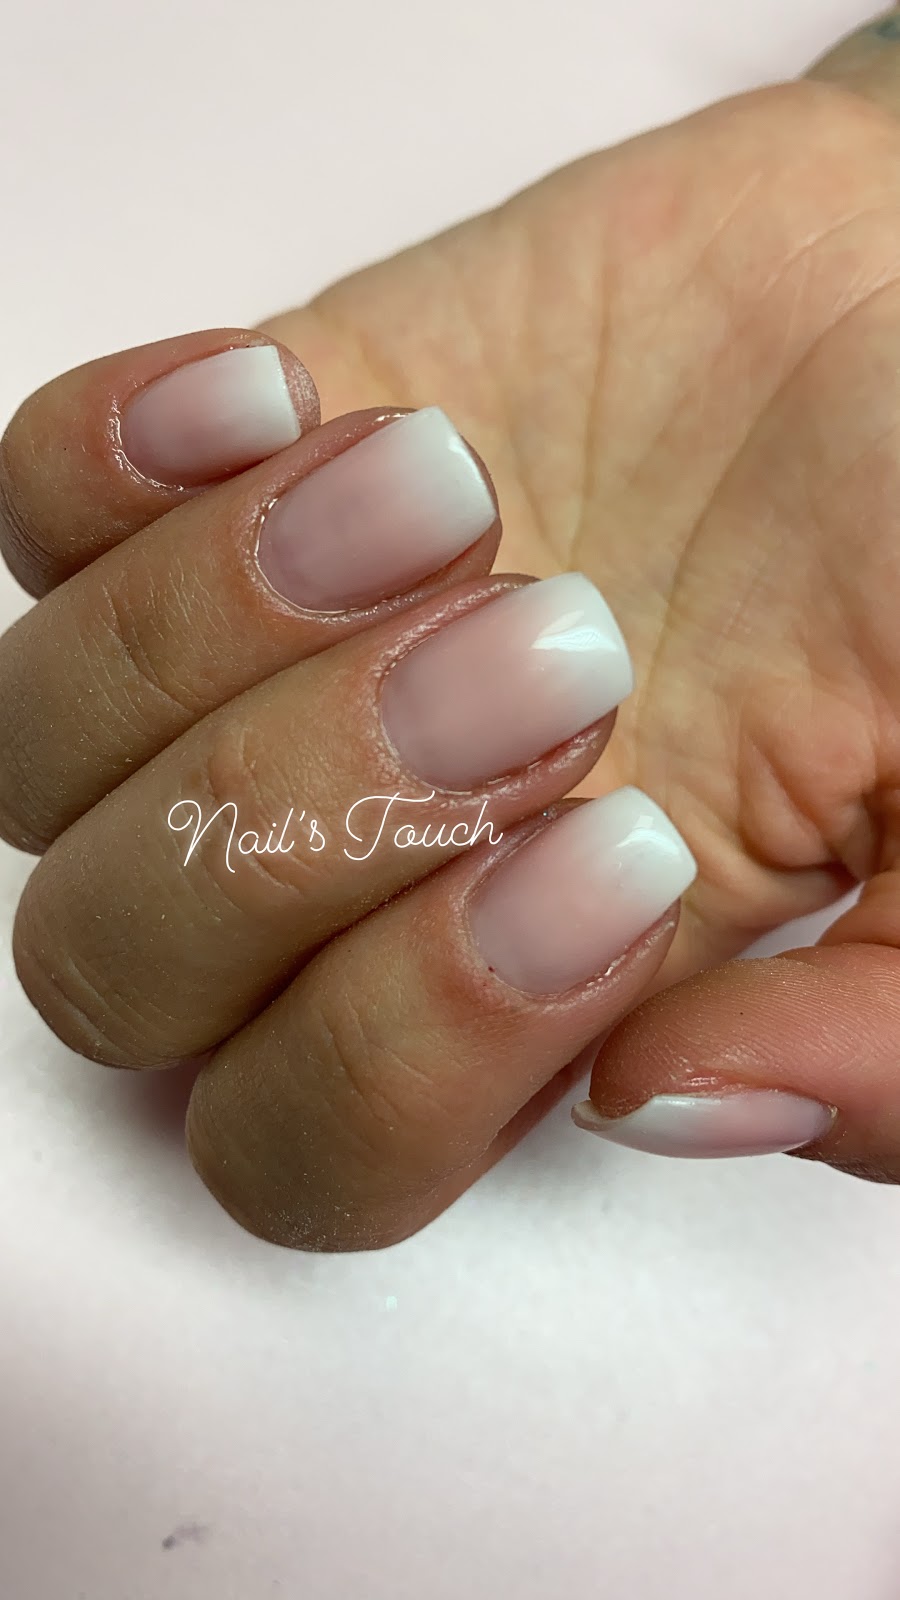 NAIL’S TOUCH